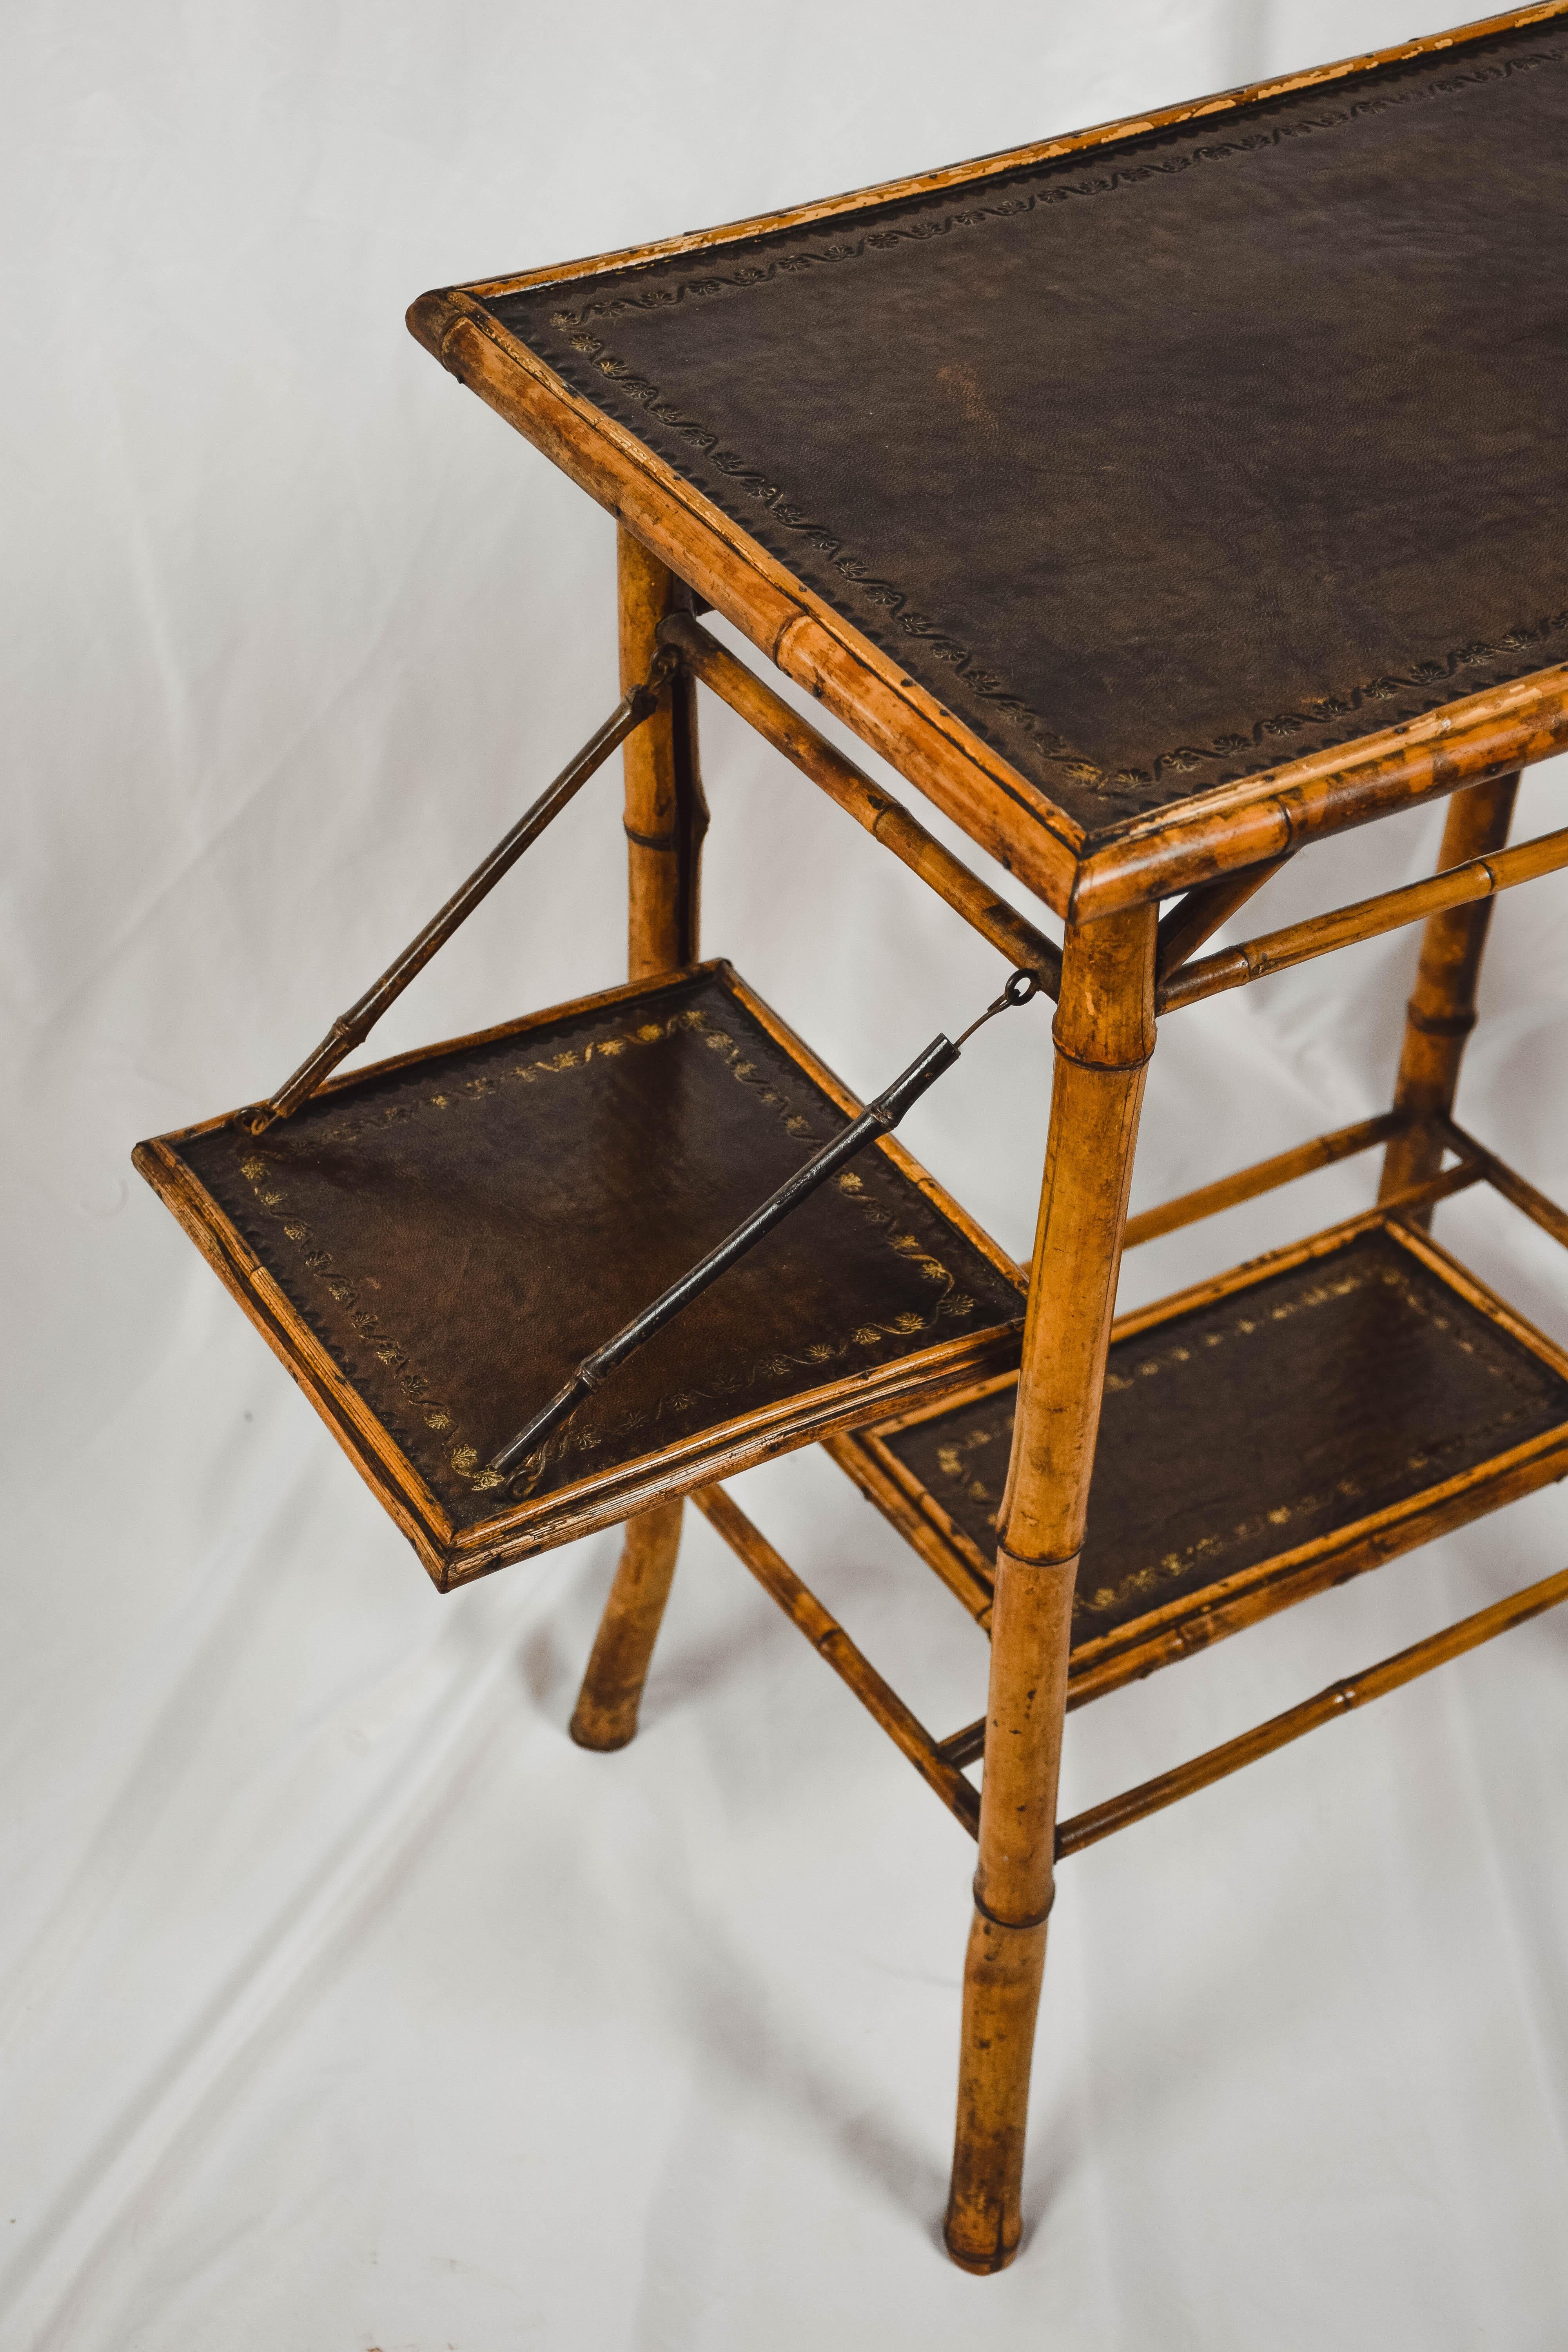 Vintage two tiered tiger bamboo small table with leather embossed top and shelf. The piece also has two leather embossed side shelves that fold up and down.